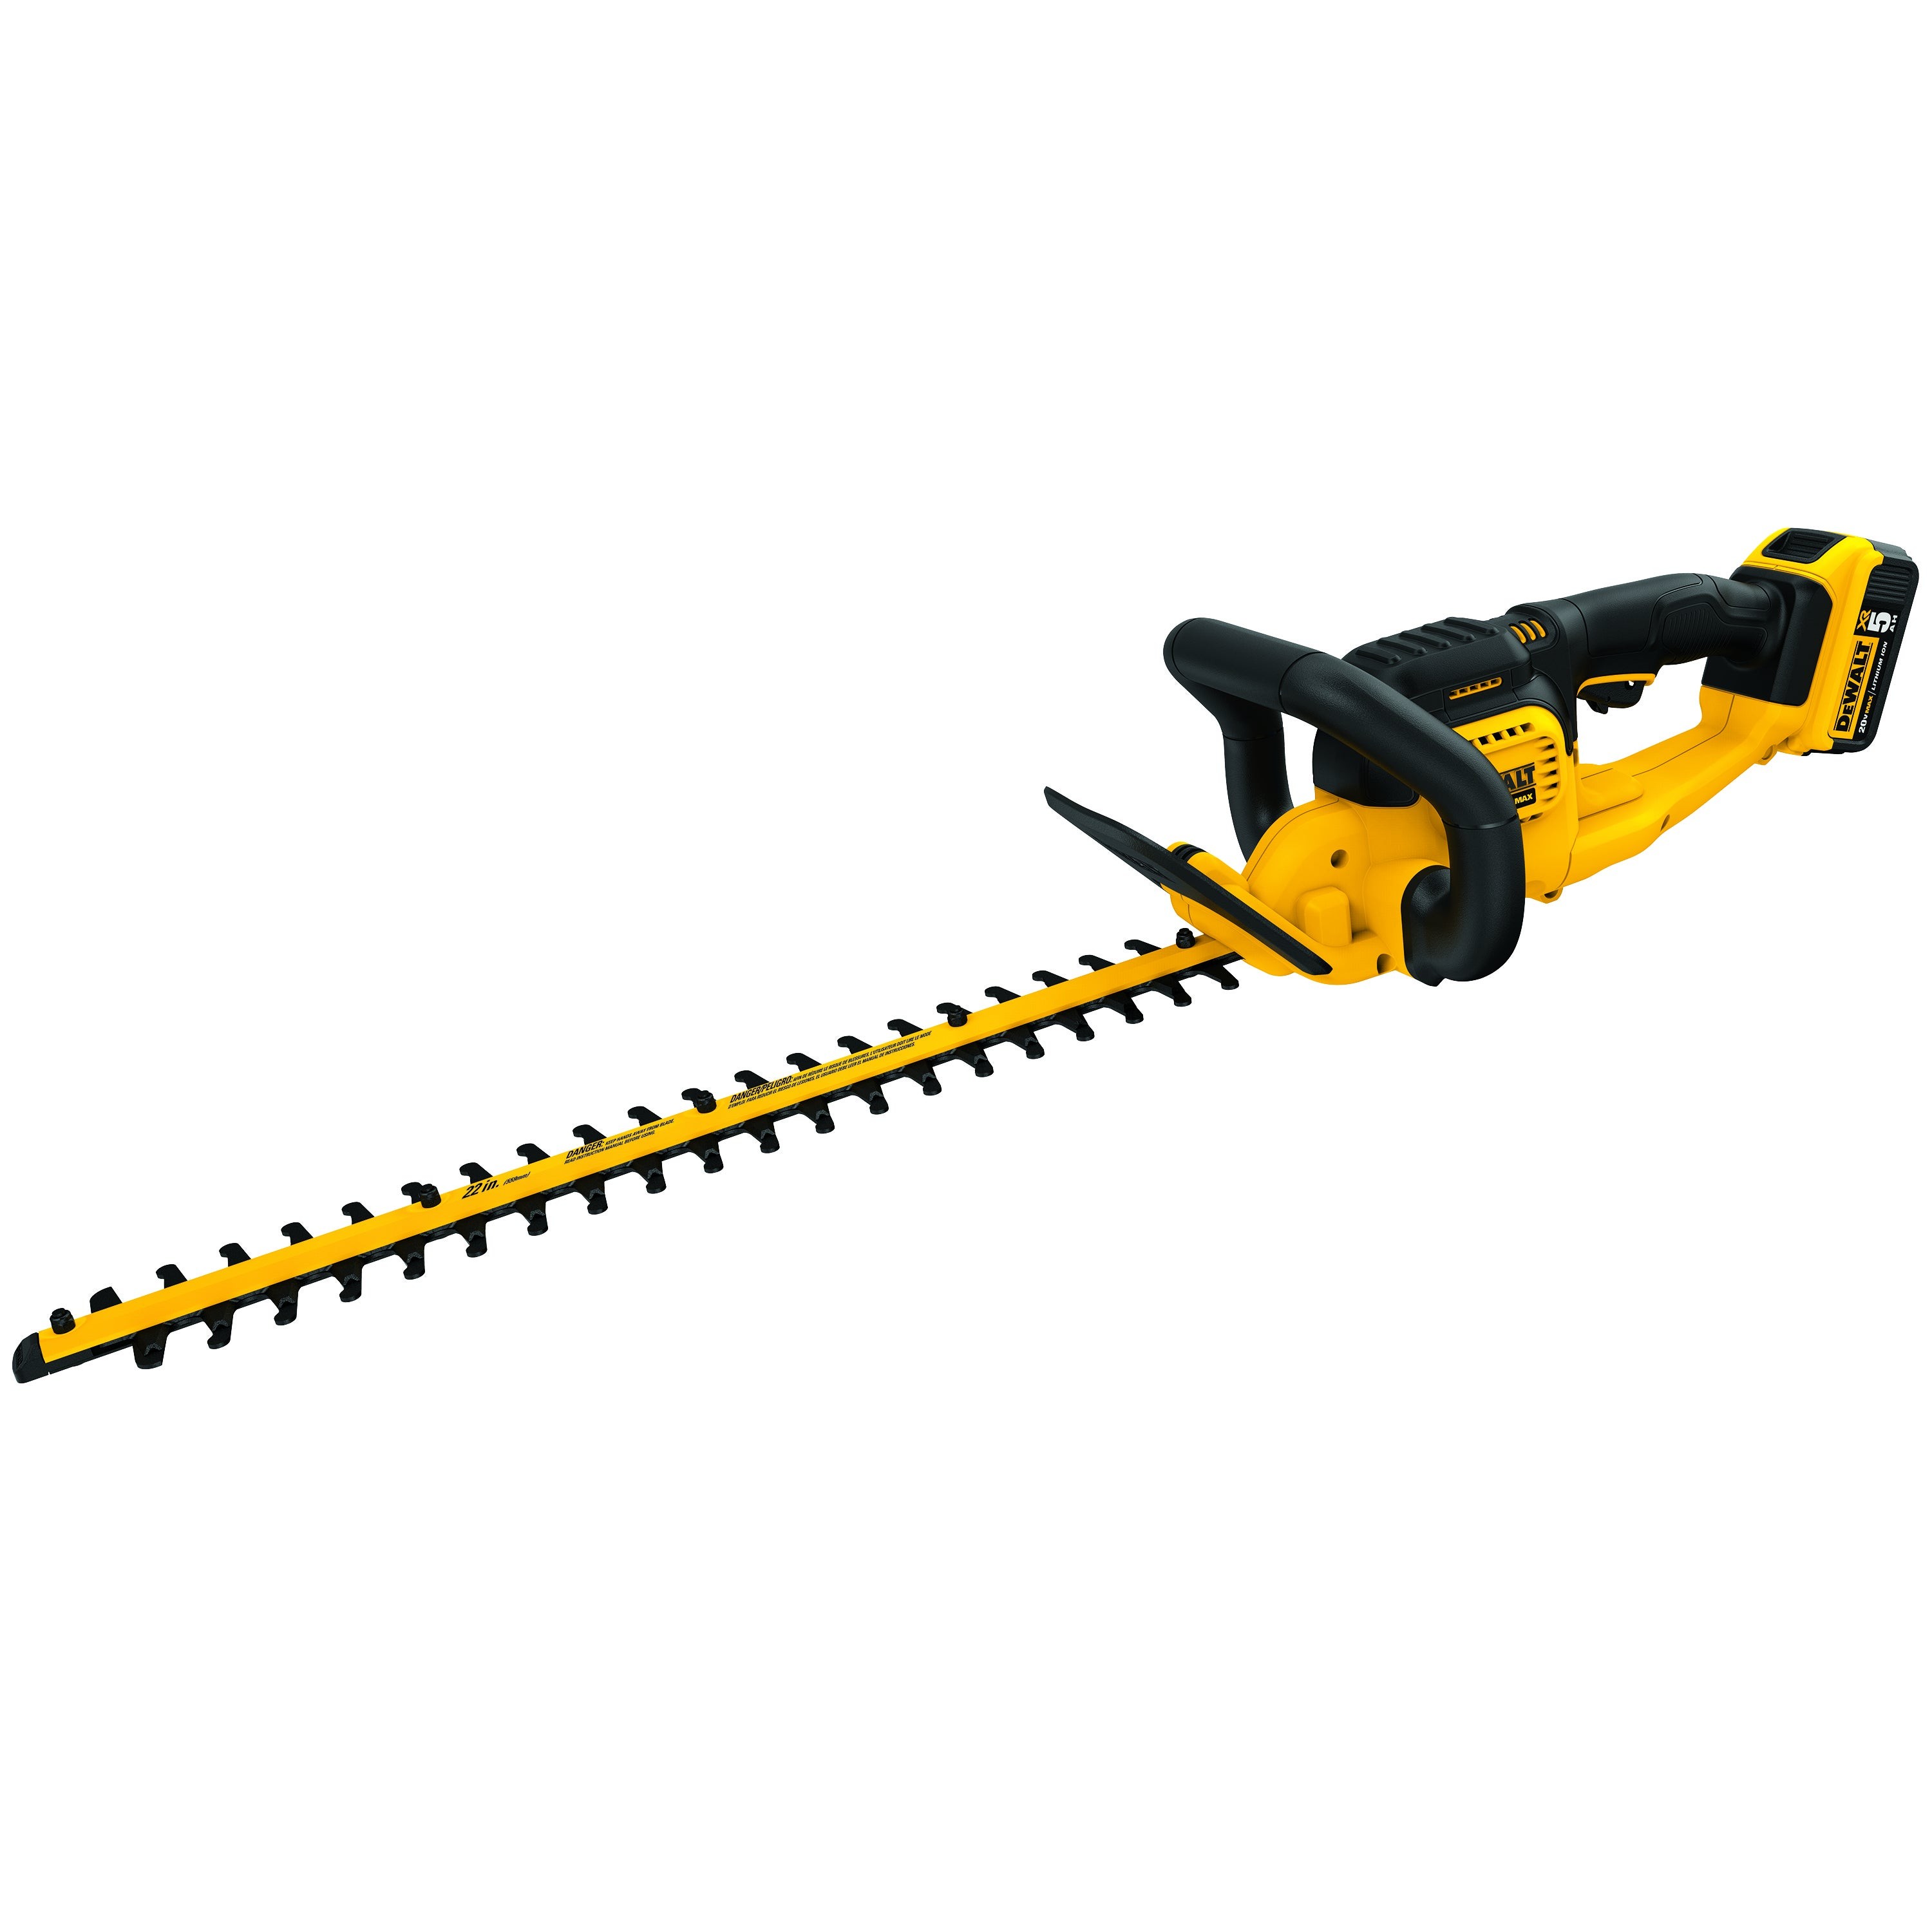 20V Max Lithium-Ion Hedge Trimmer